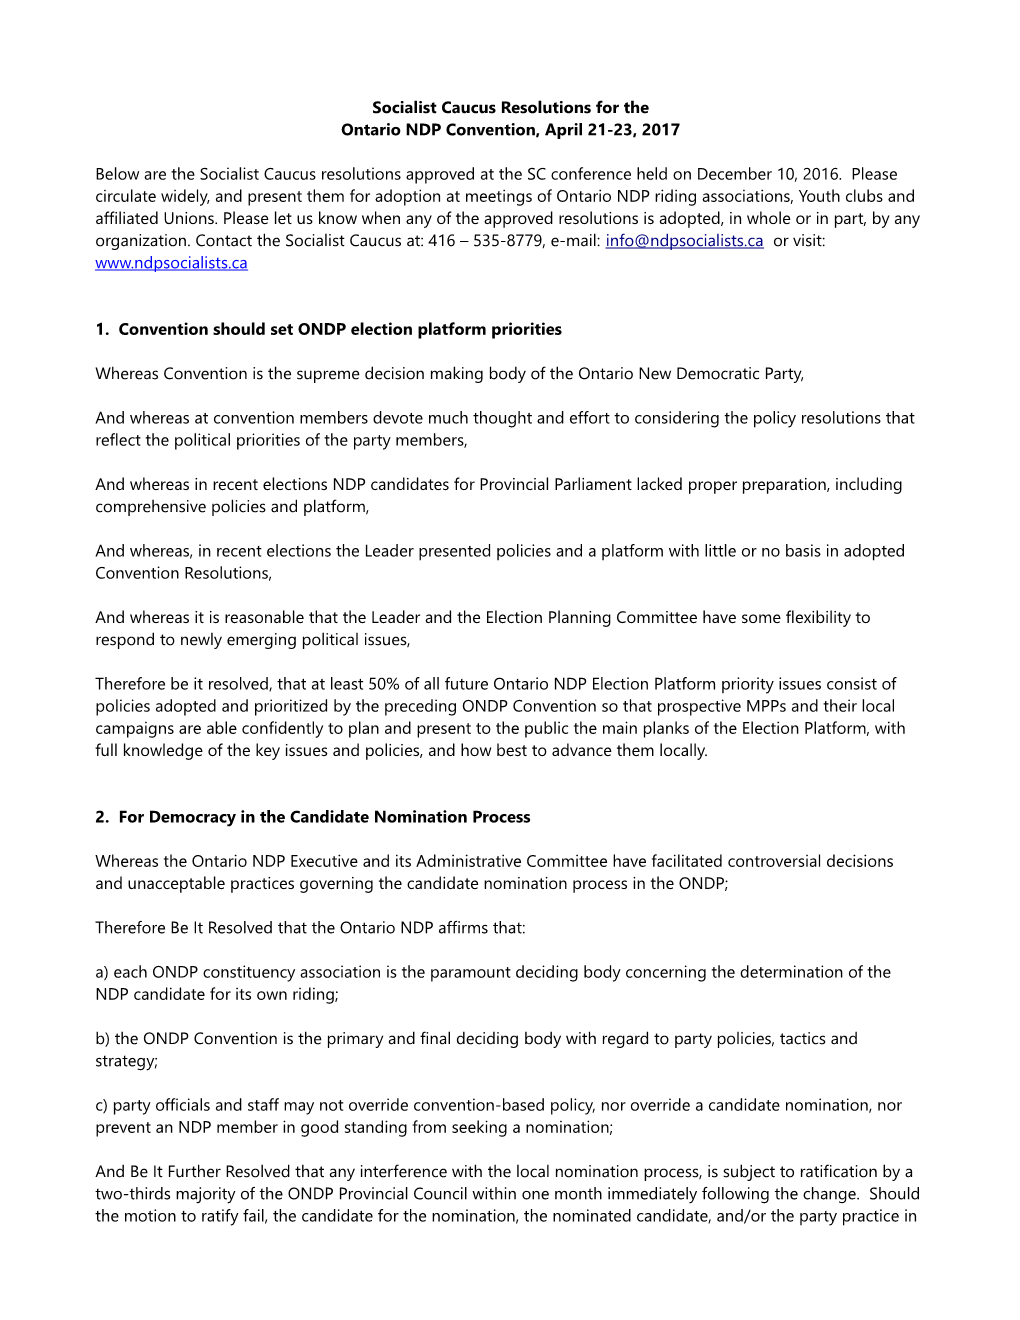 Socialist Caucus Resolutions for The